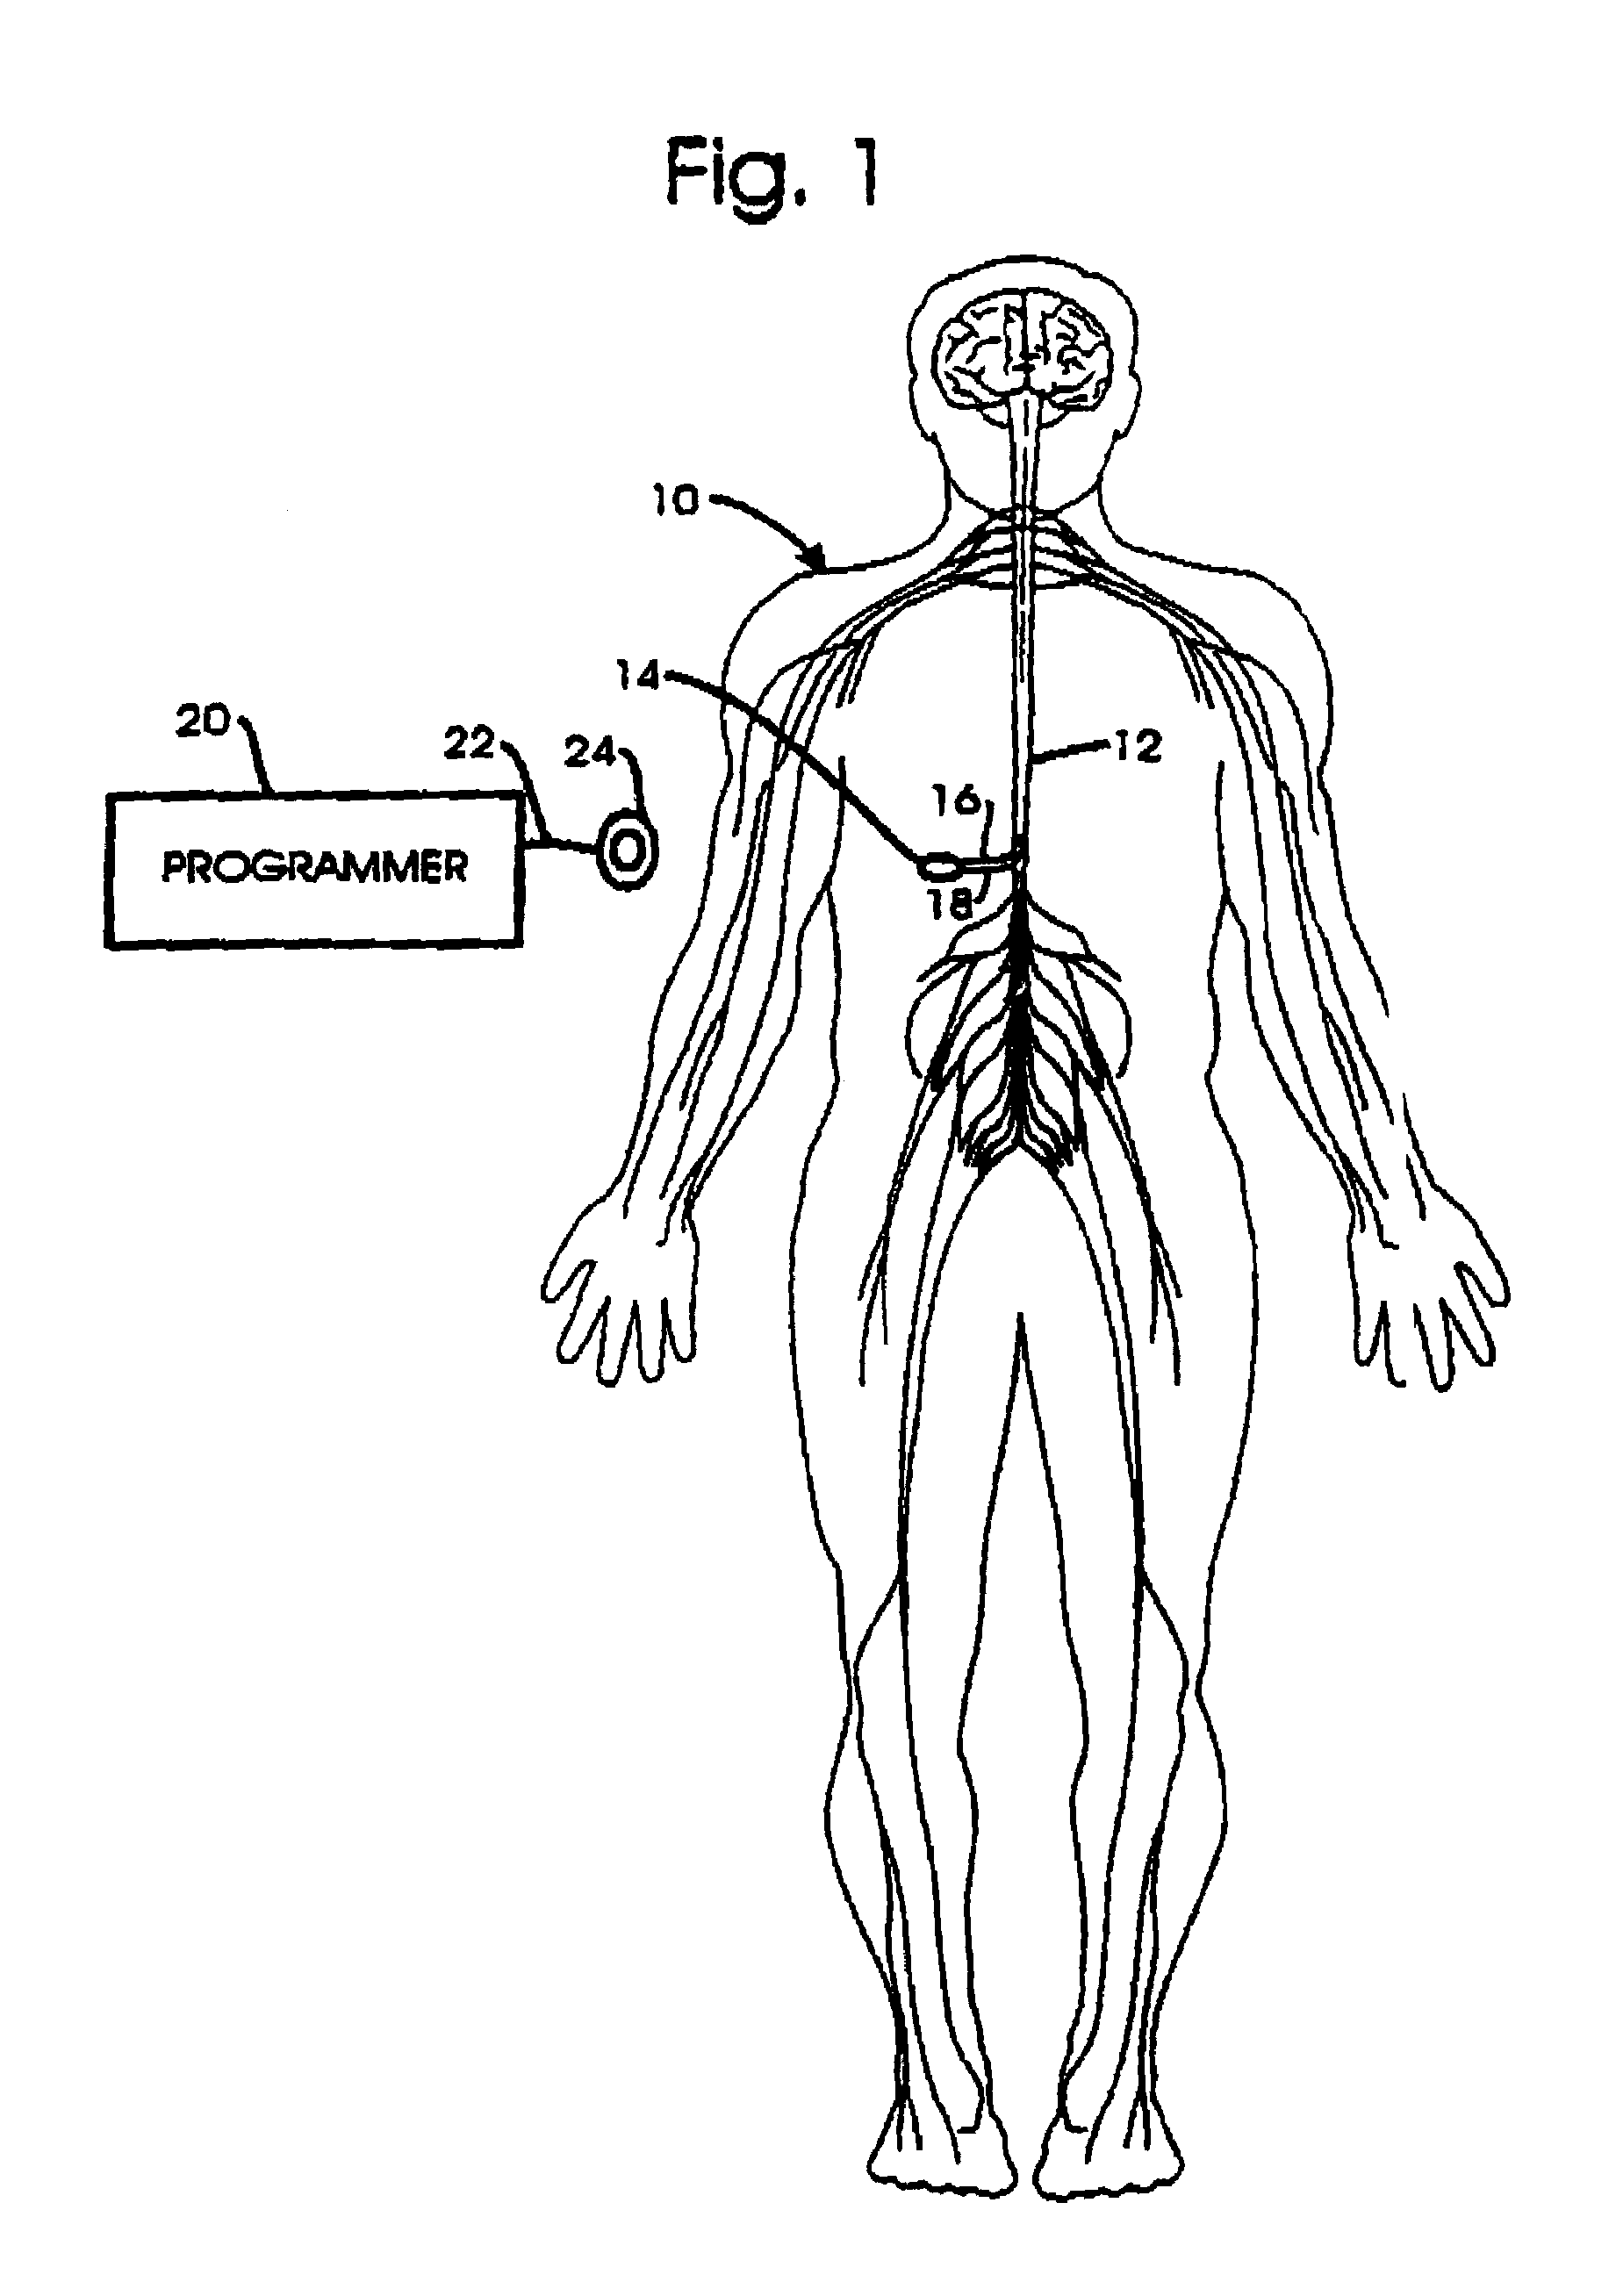 Technique for adjusting the locus of excitation of electrically excitable tissue